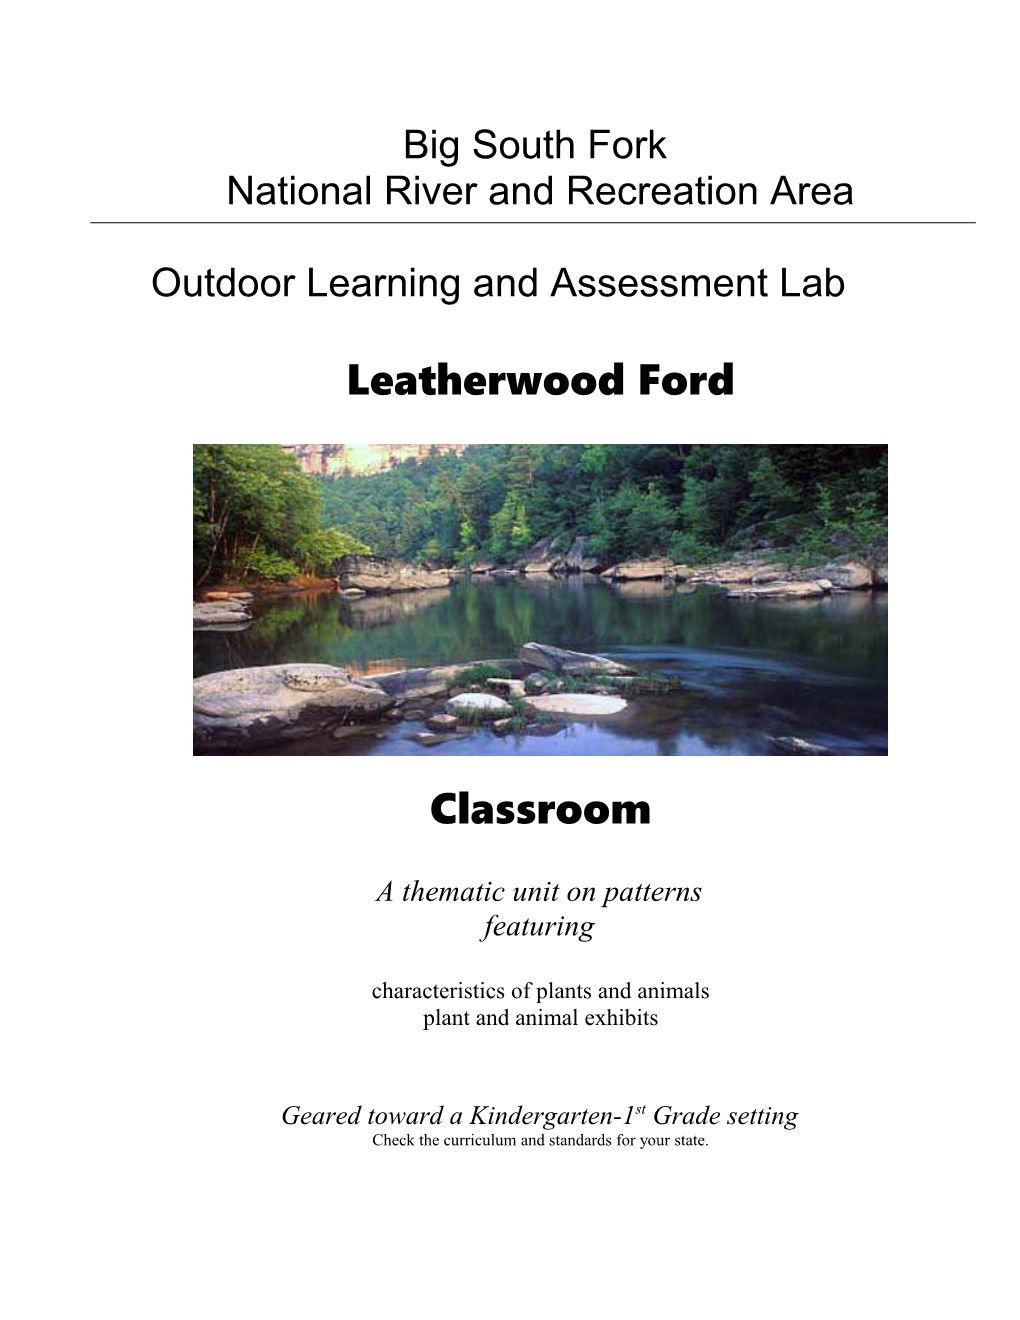 Nationalriver and Recreation Area